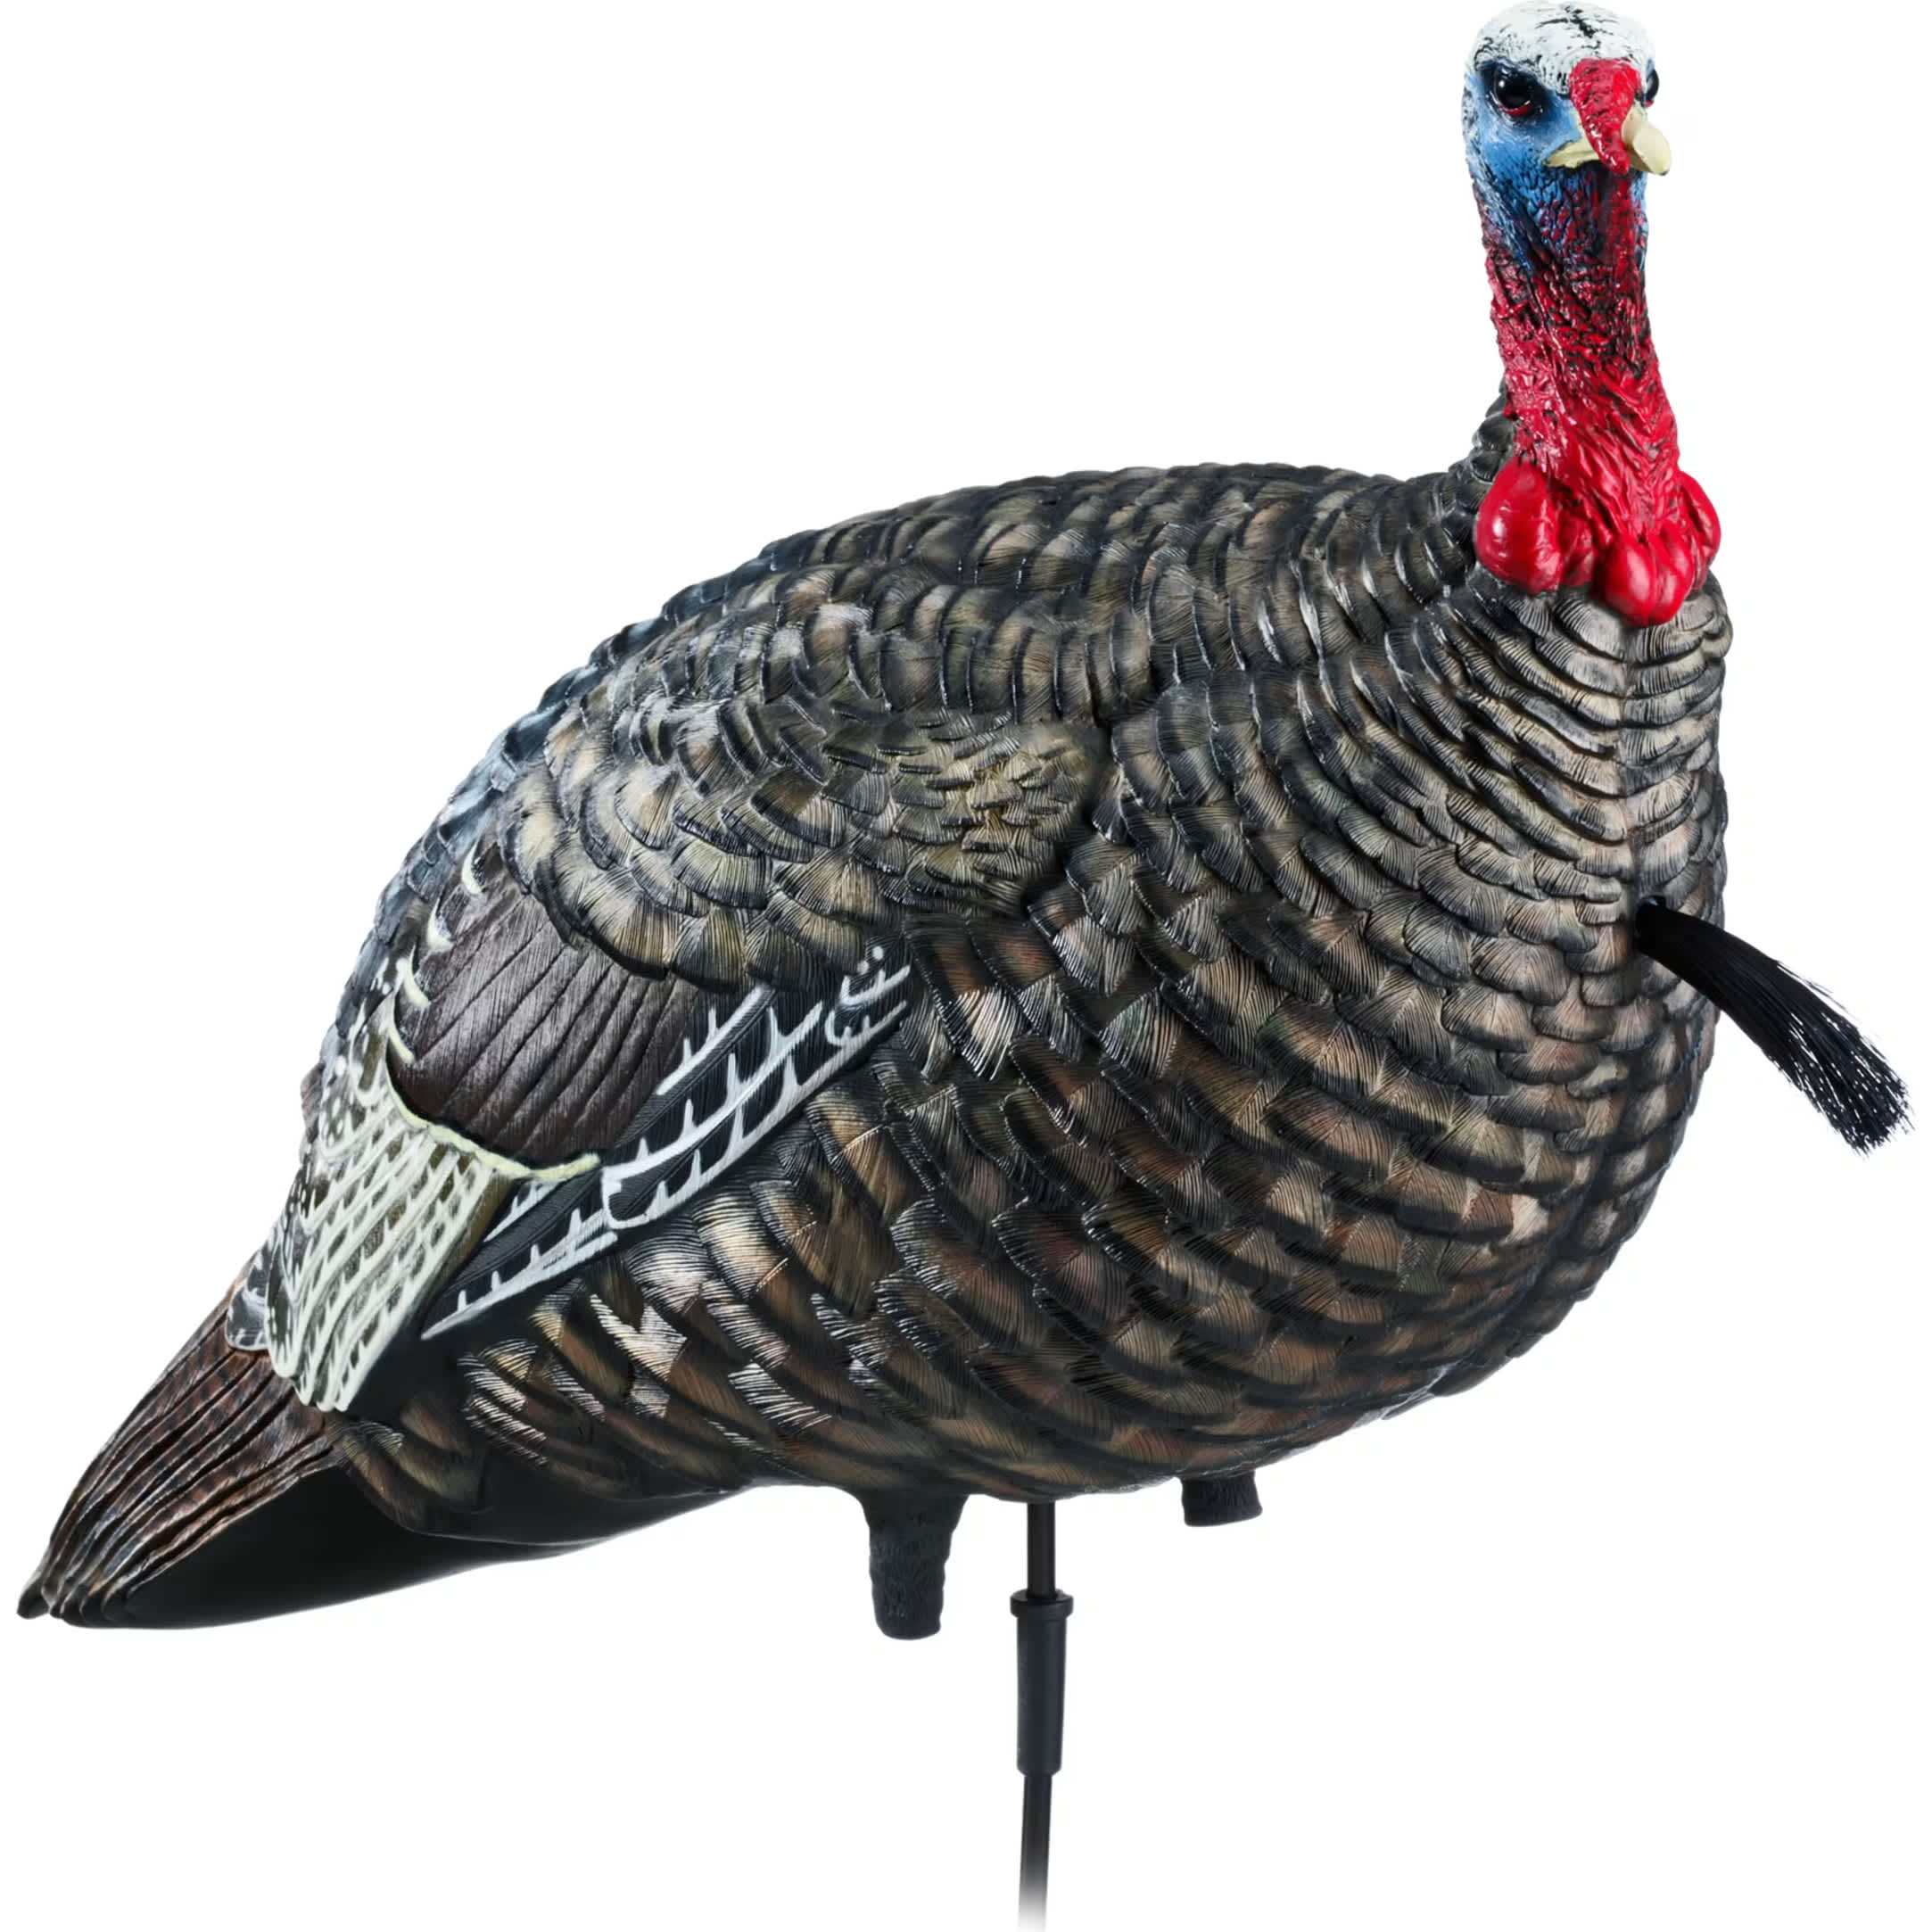 Reel Game Calls - Free crow call with every Turkey Reel?